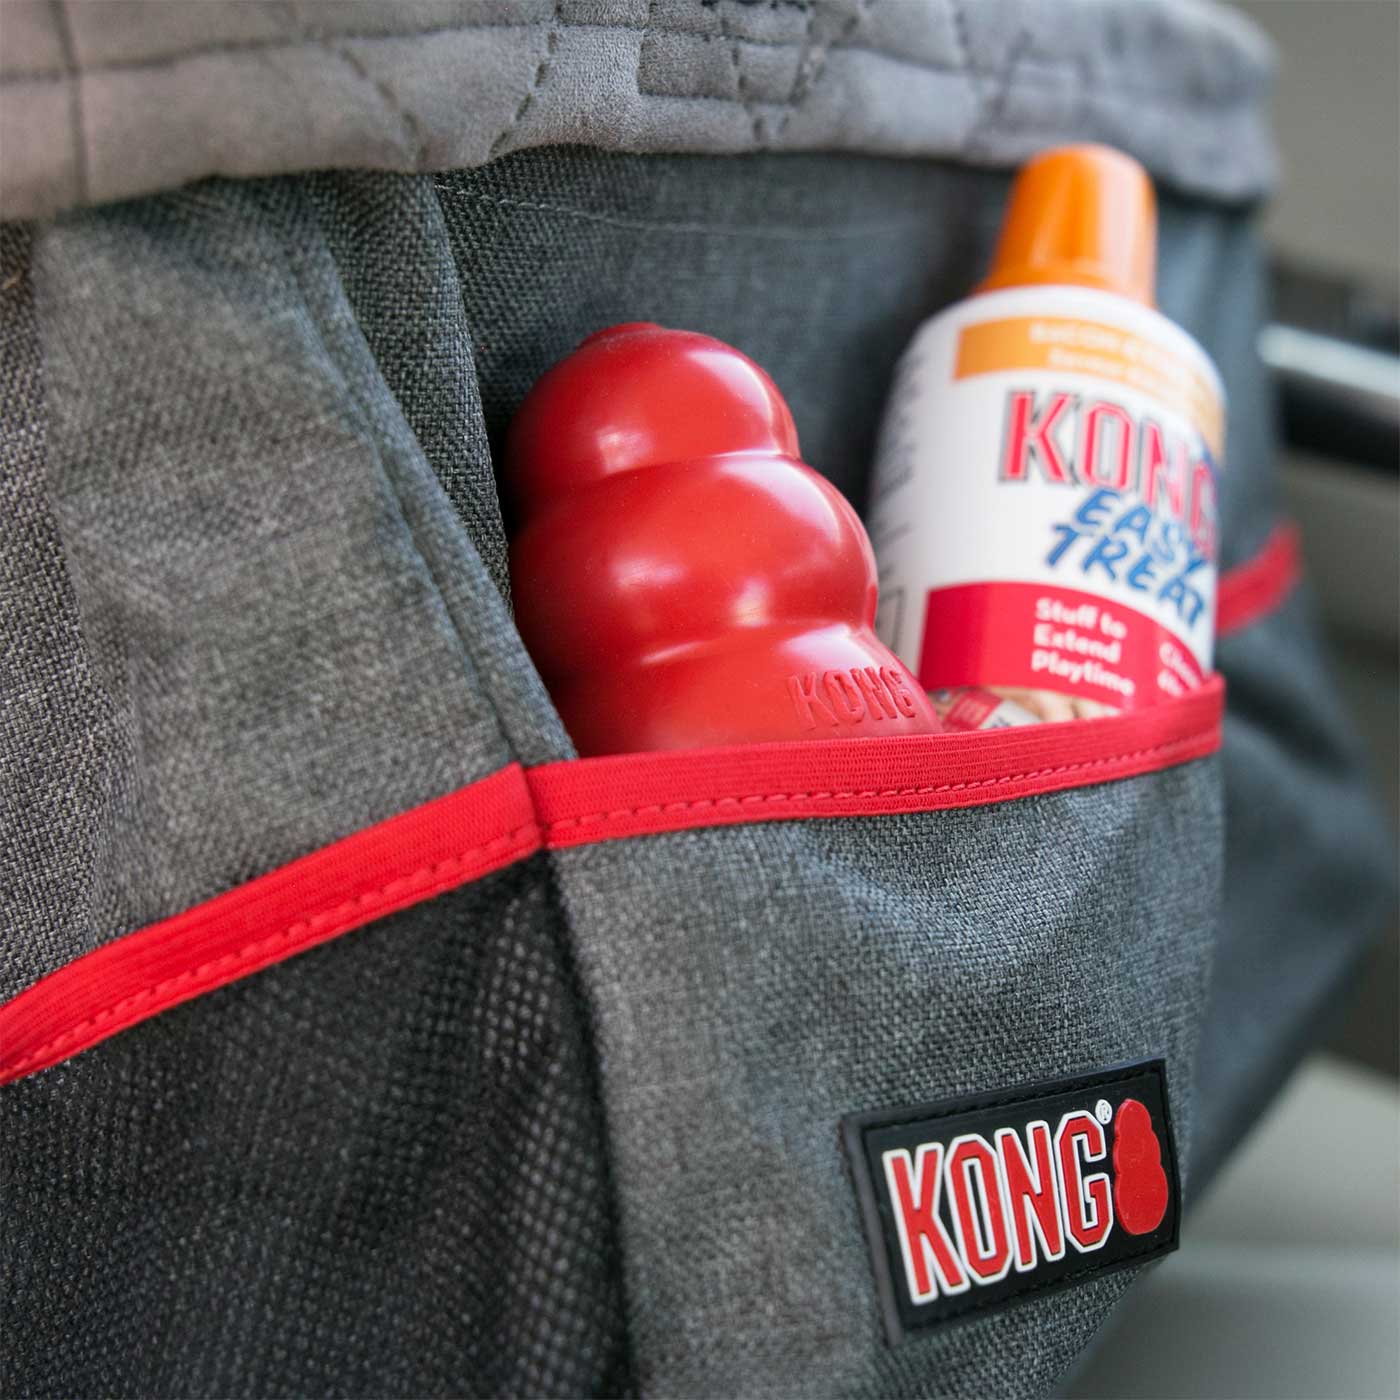 KONG Secure Booster Seat for Dogs